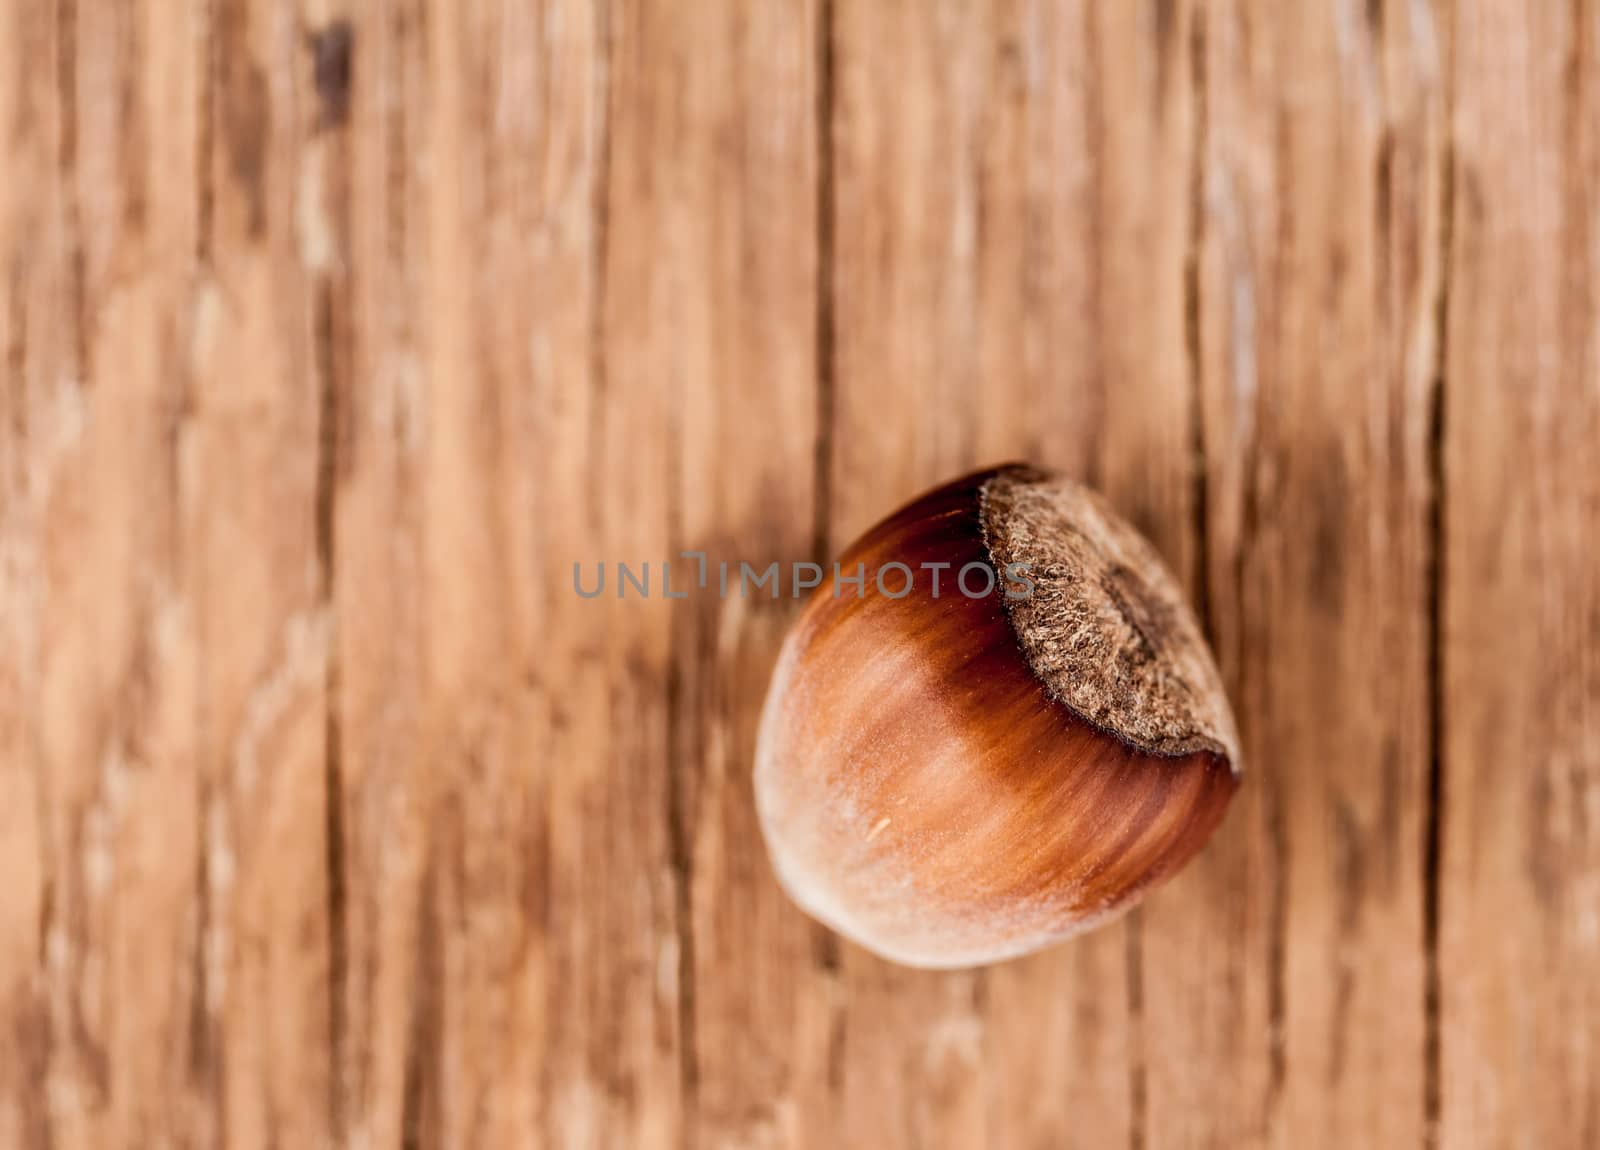 whole wood nut close-up  by MegaArt